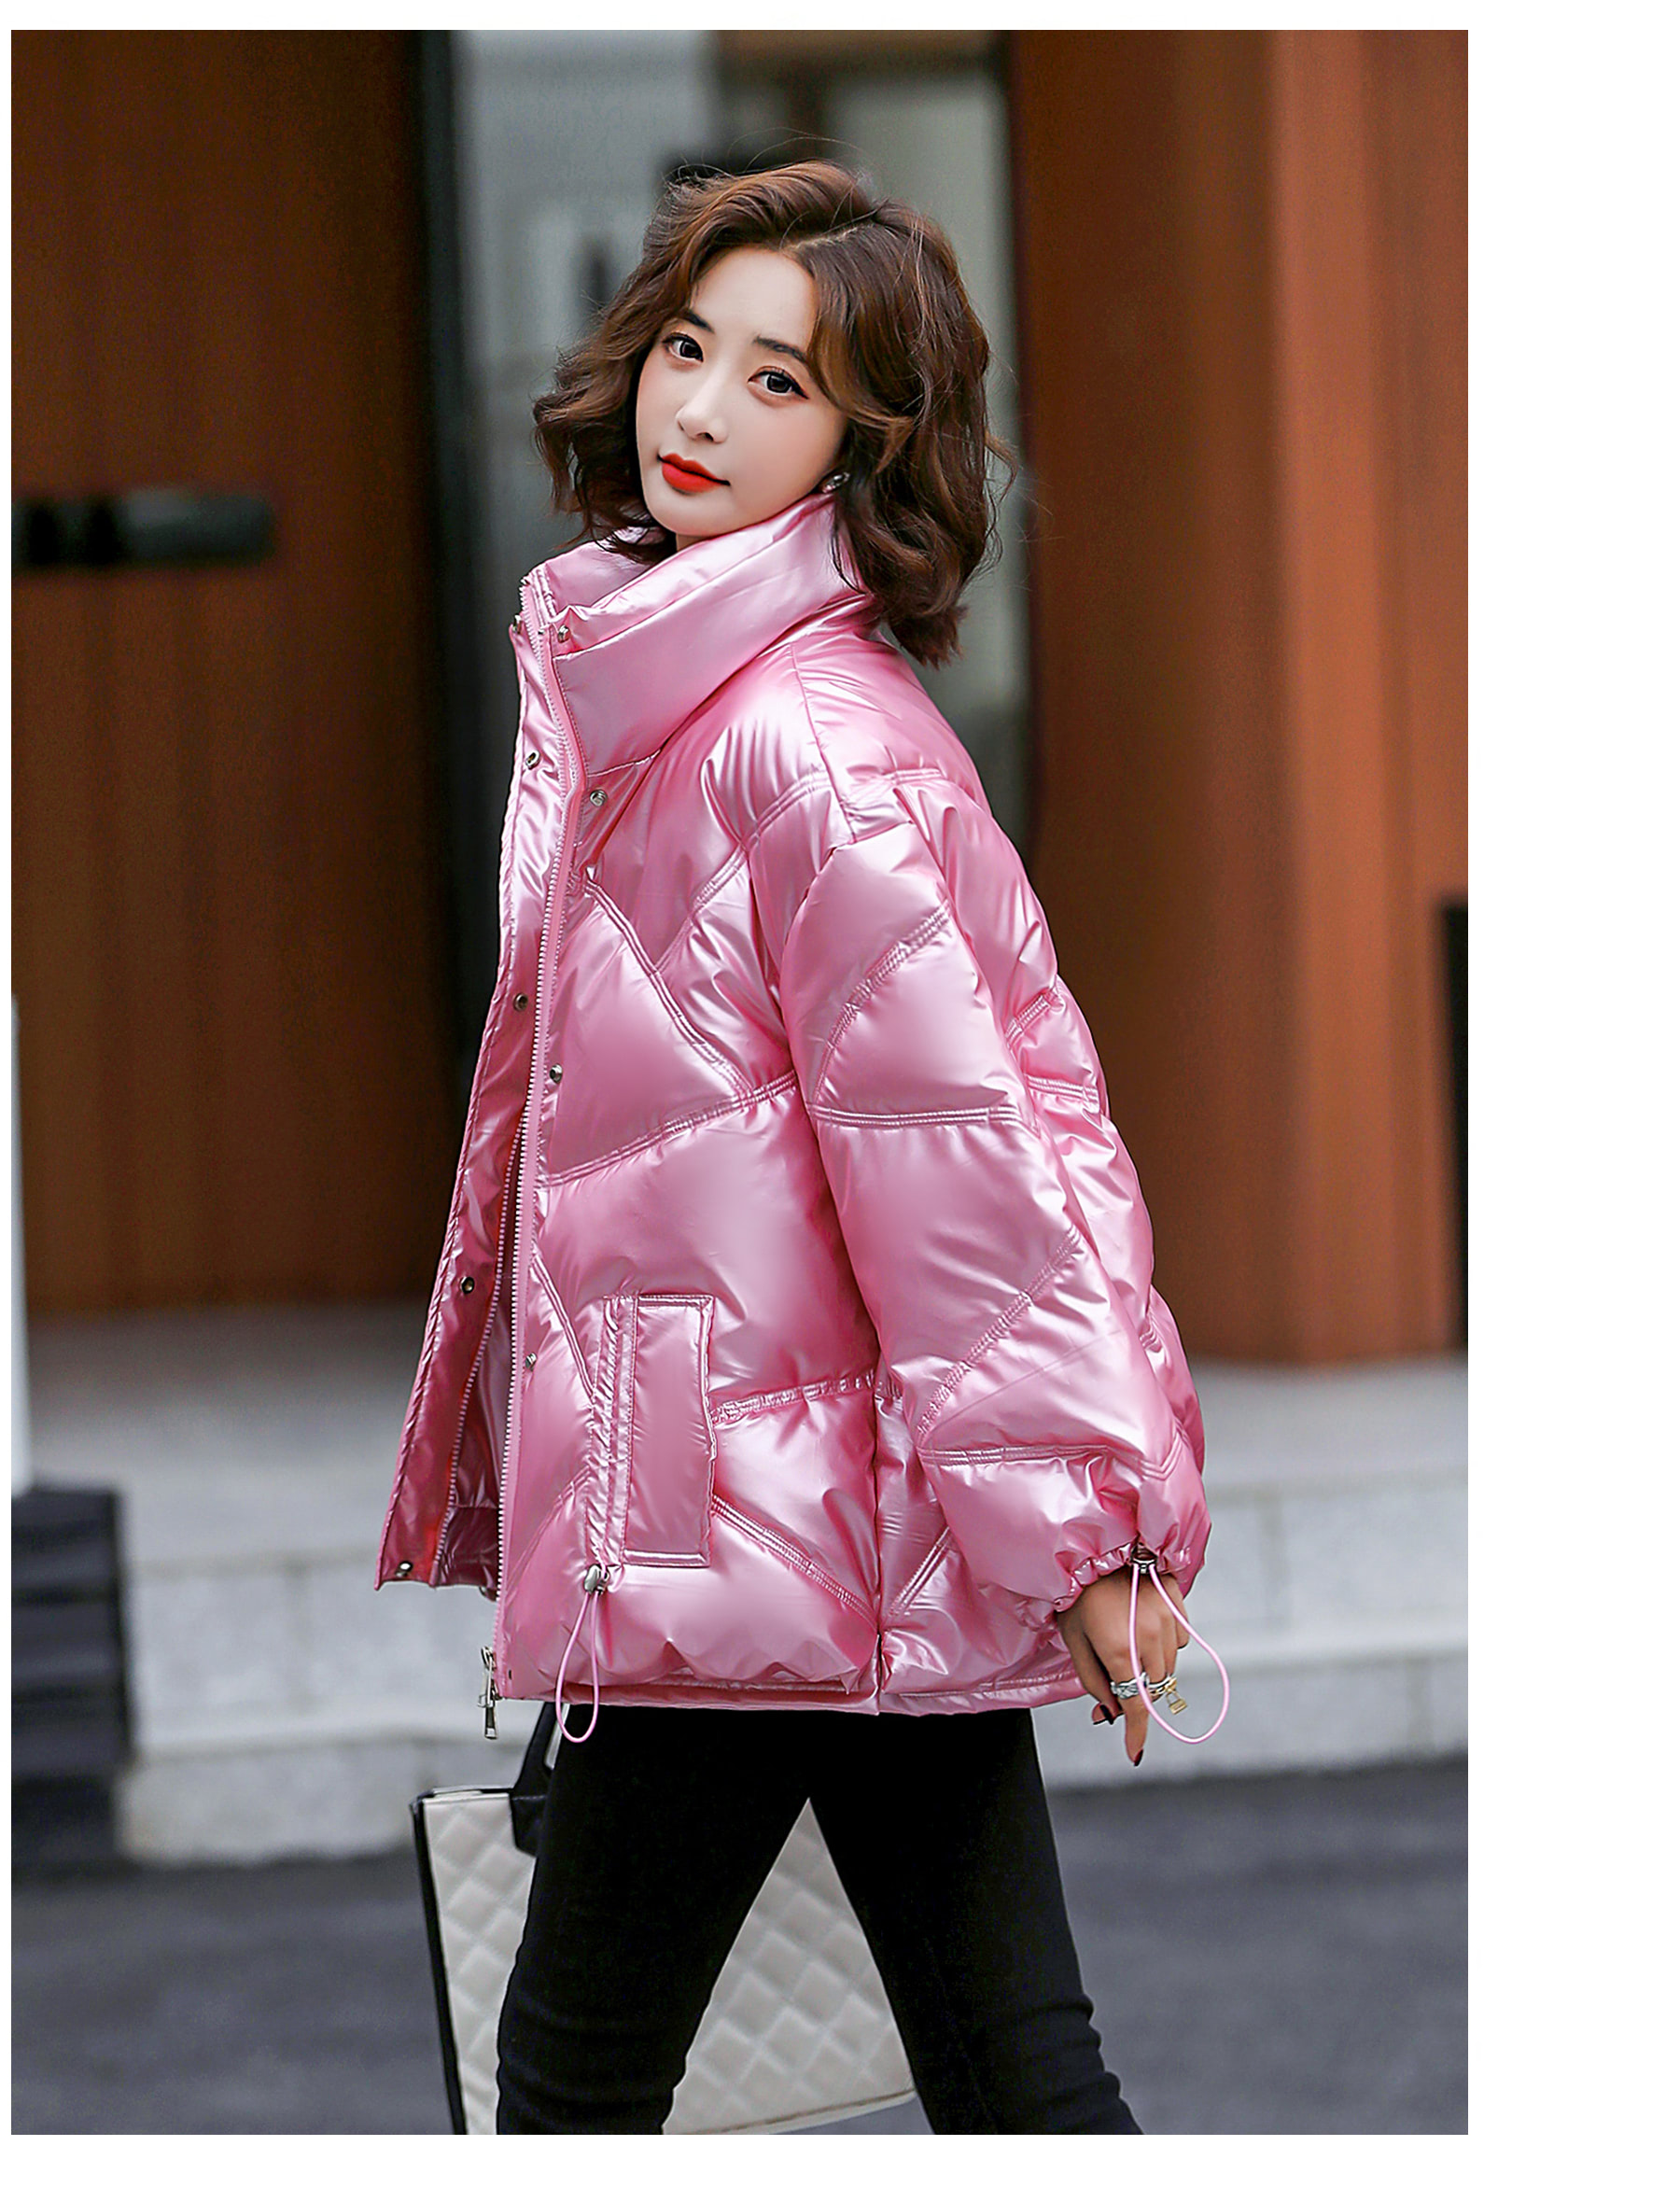 Women's Cropped Puffer Jacket Fashion Winter Outfit Coat21